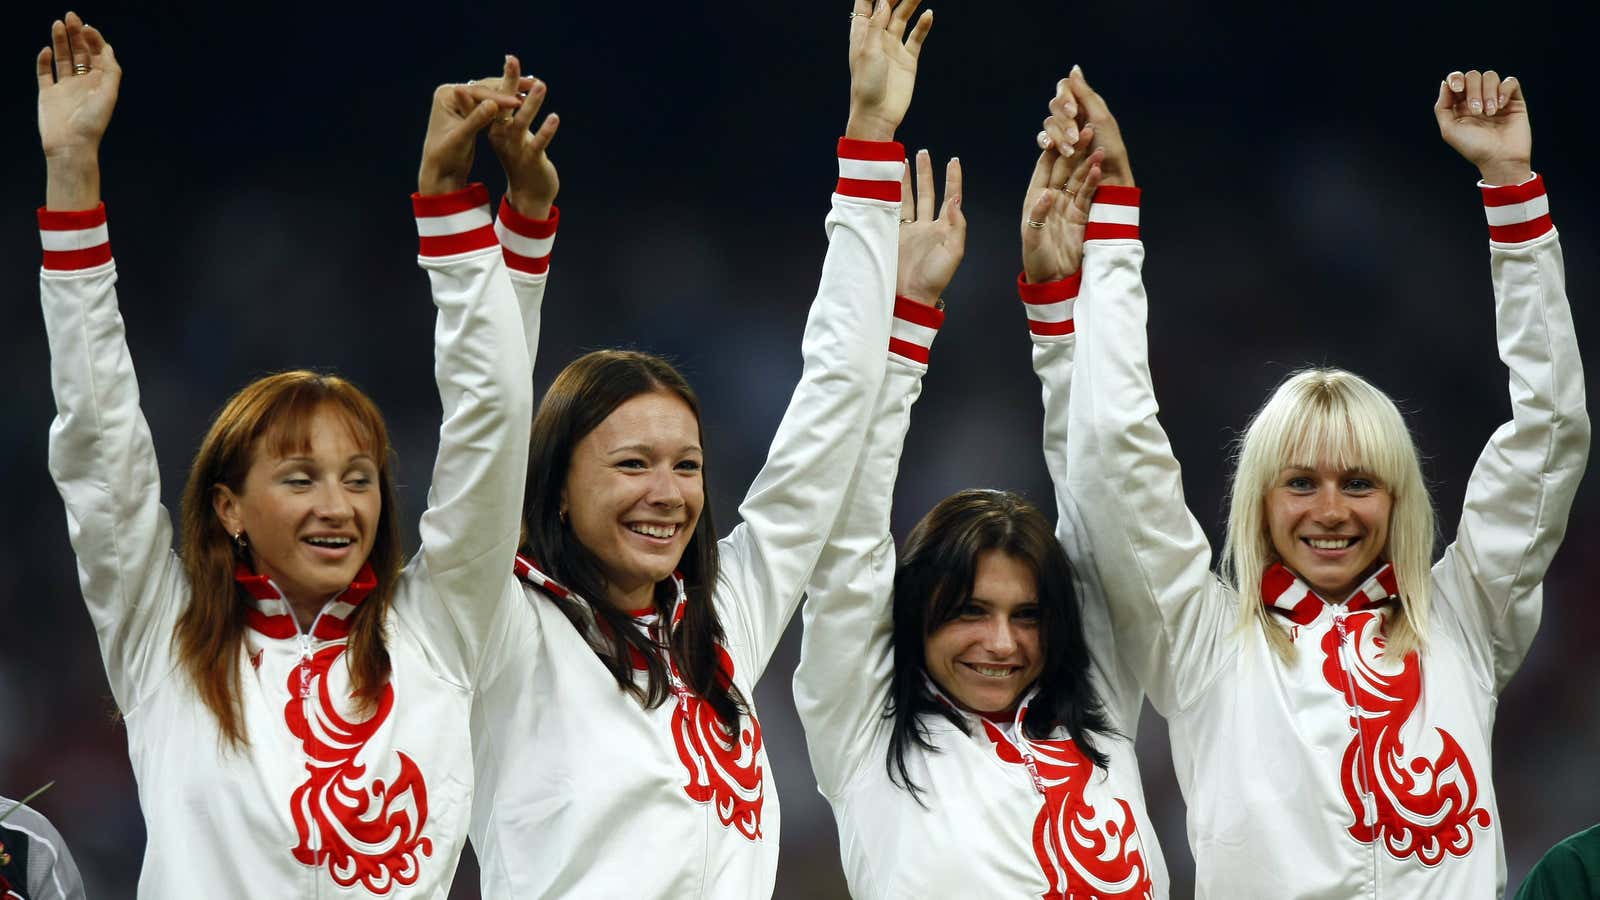 Team Russia was stripped of its 2008 relay gold upon evidence of doping.